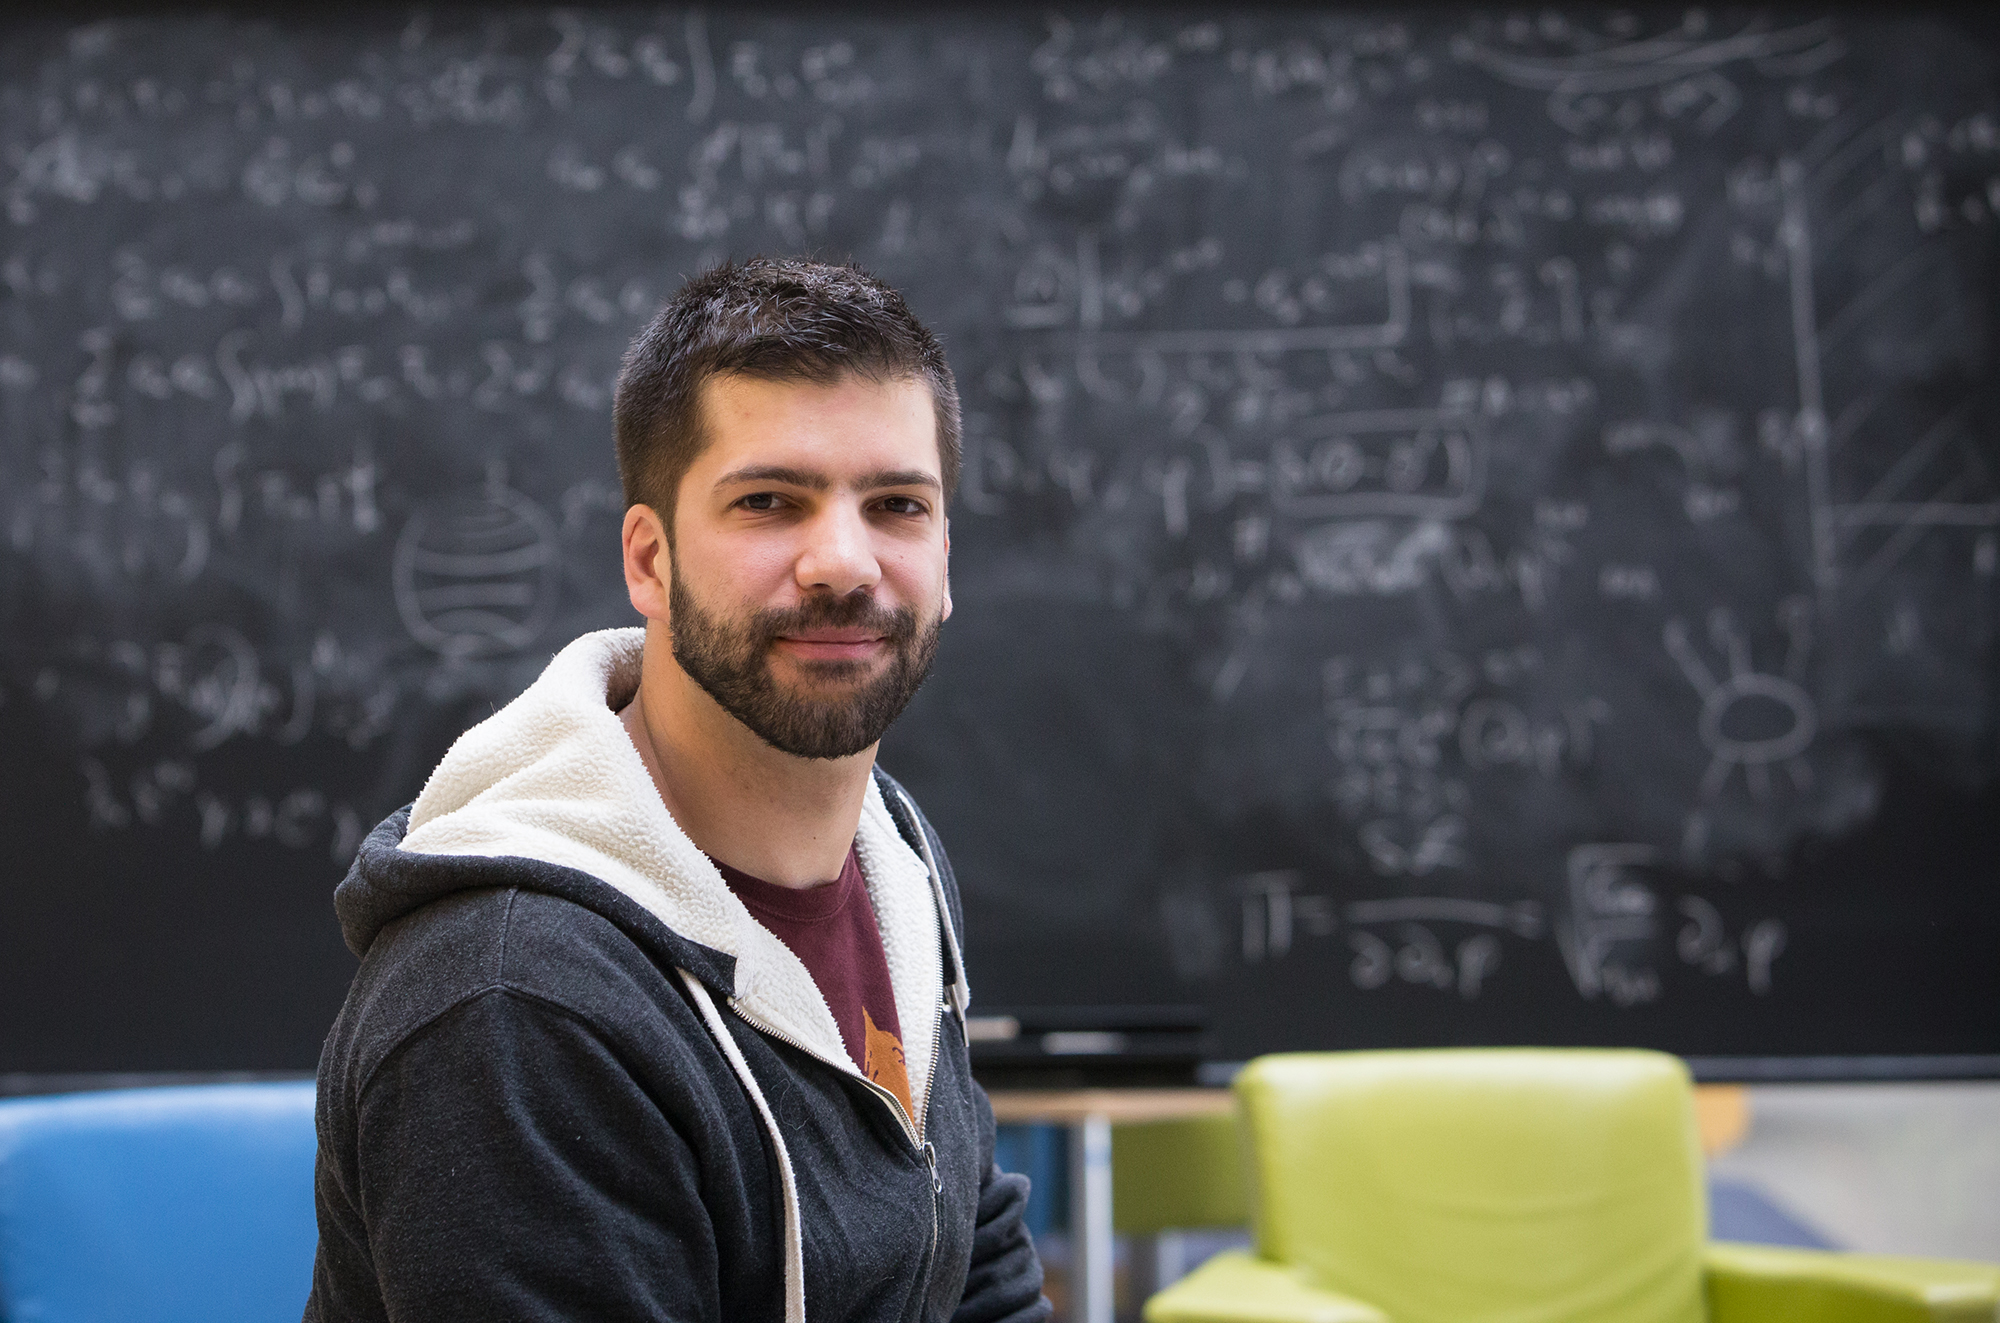 Giacomo Torlai stands in front of a blurry blackboard filled with equations in PI's atrium